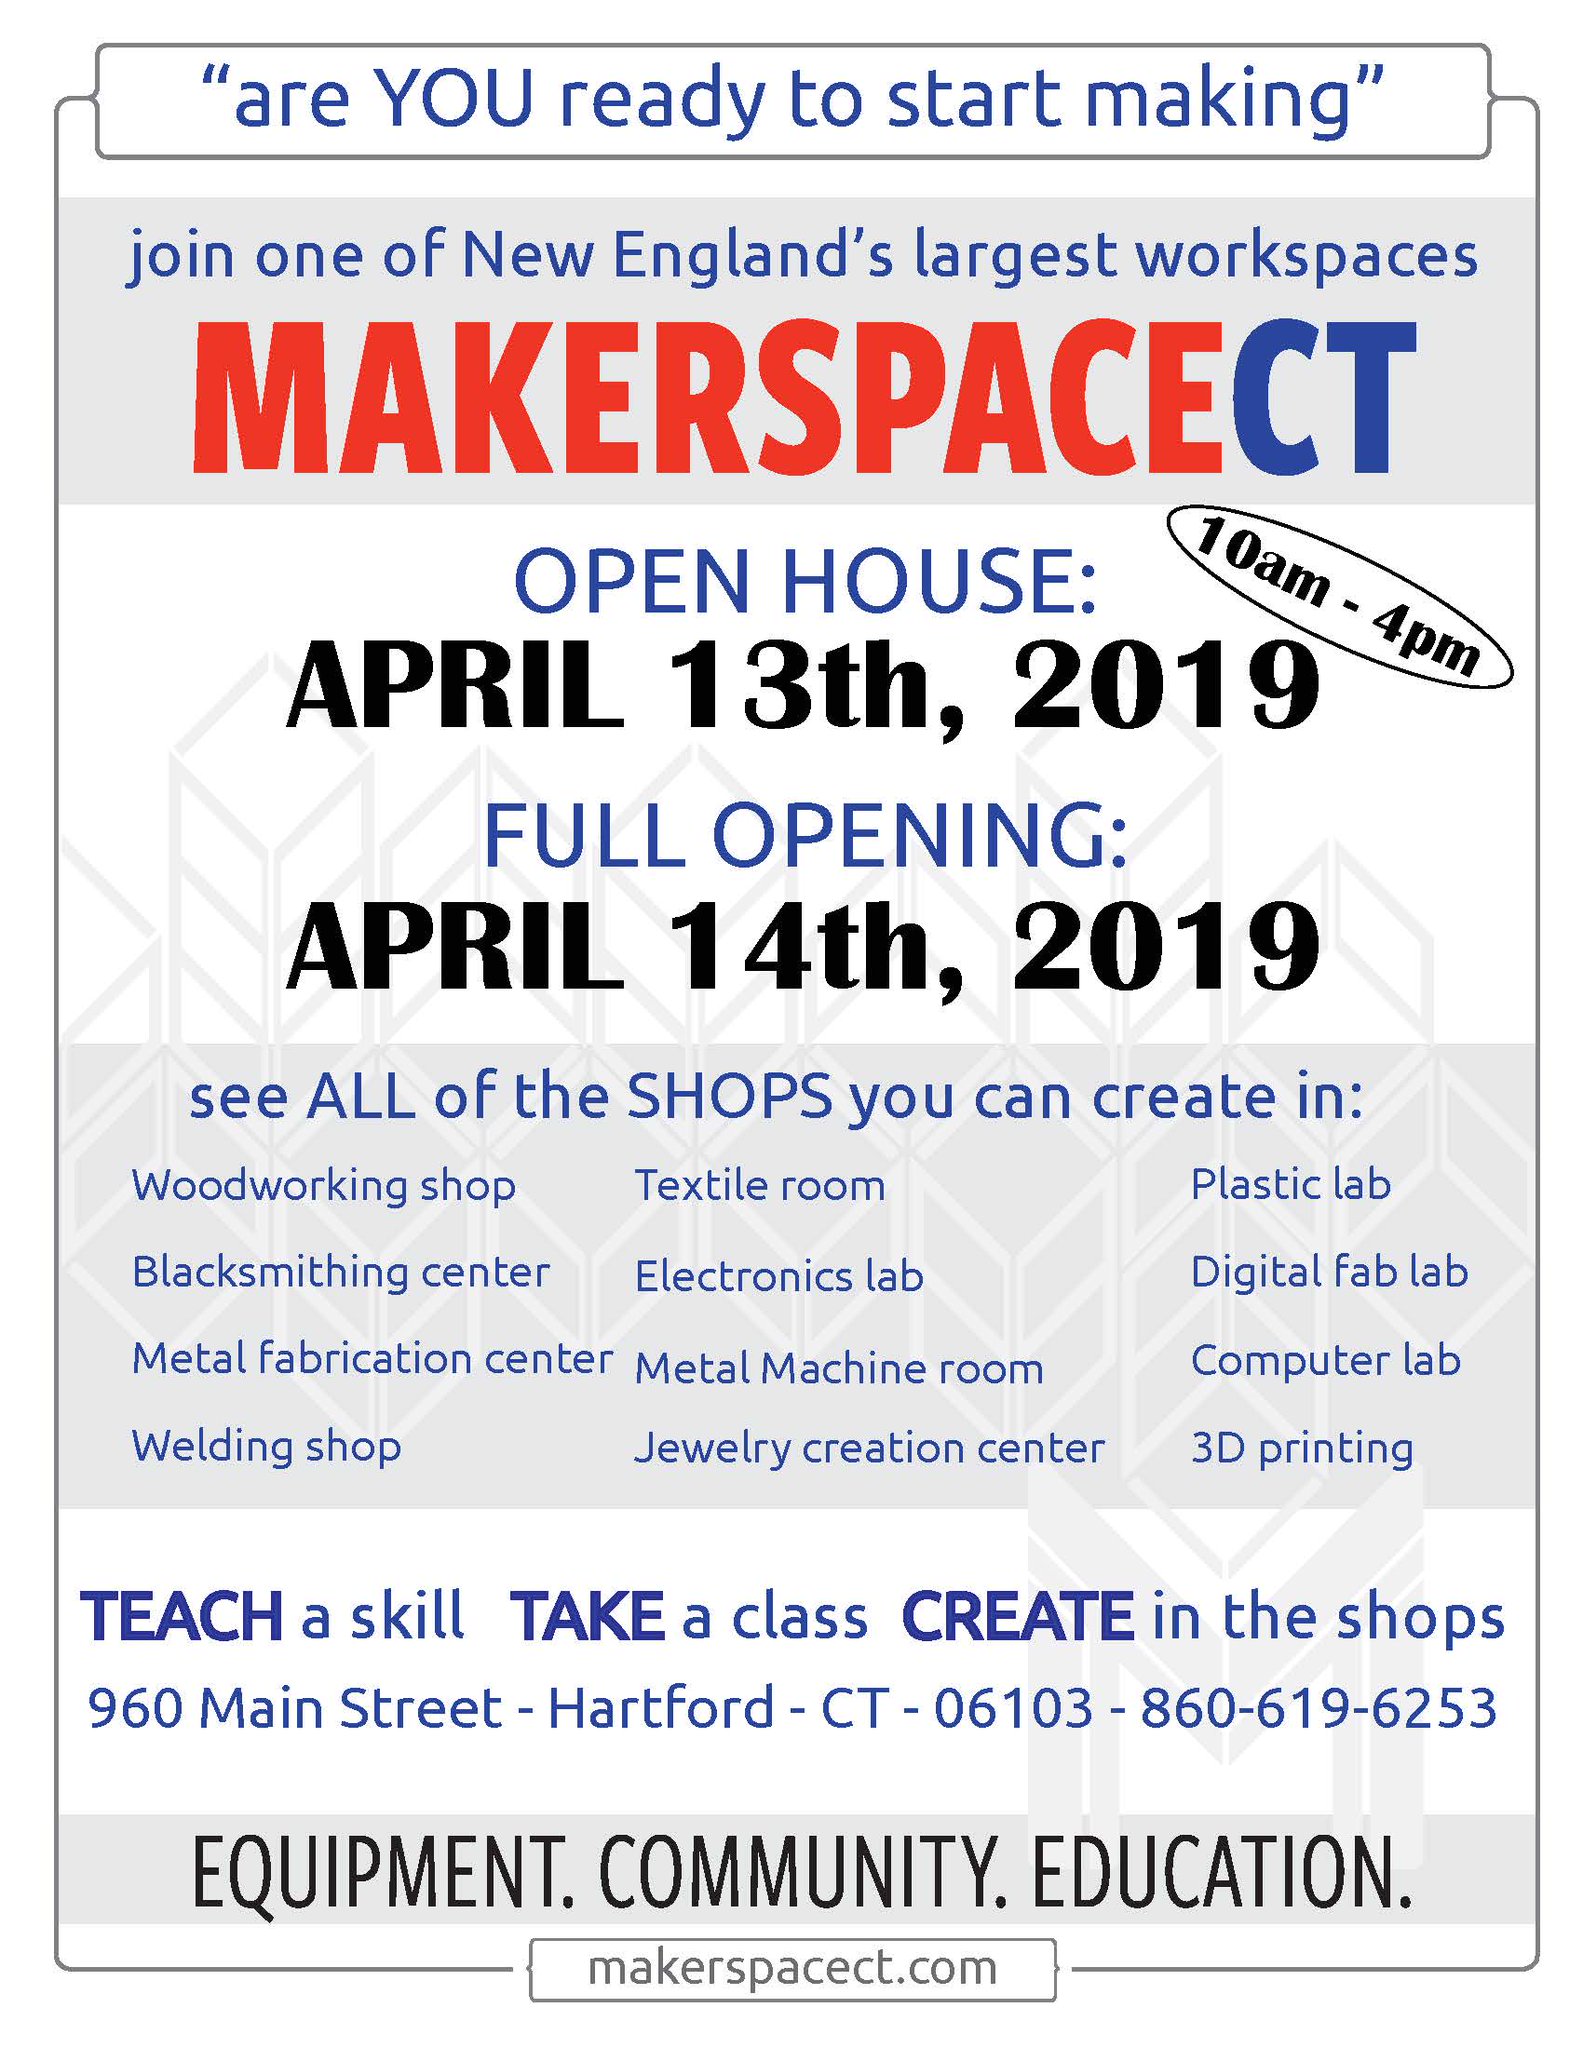 The Ct Forum On Twitter How Cool Is This Makerspacect One Of New England S Largest Workspaces Is Opening This Weekend Don T Miss The Festivities We Re Thrilled To Have A New Neighbor In